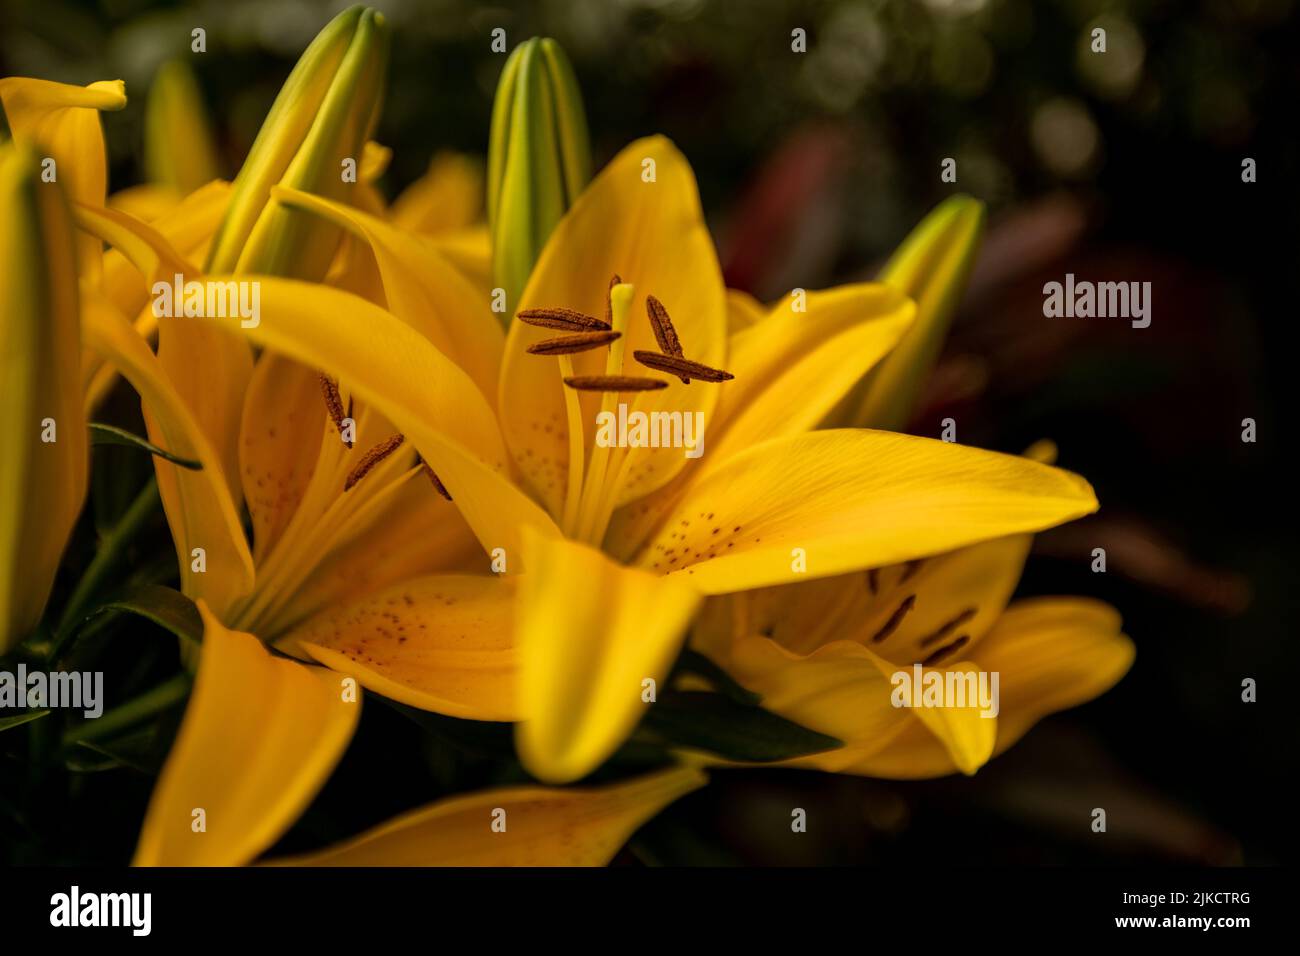 A closeup shot of yellow Golden-rayed lily flowers in a garden in a blurred background Stock Photo